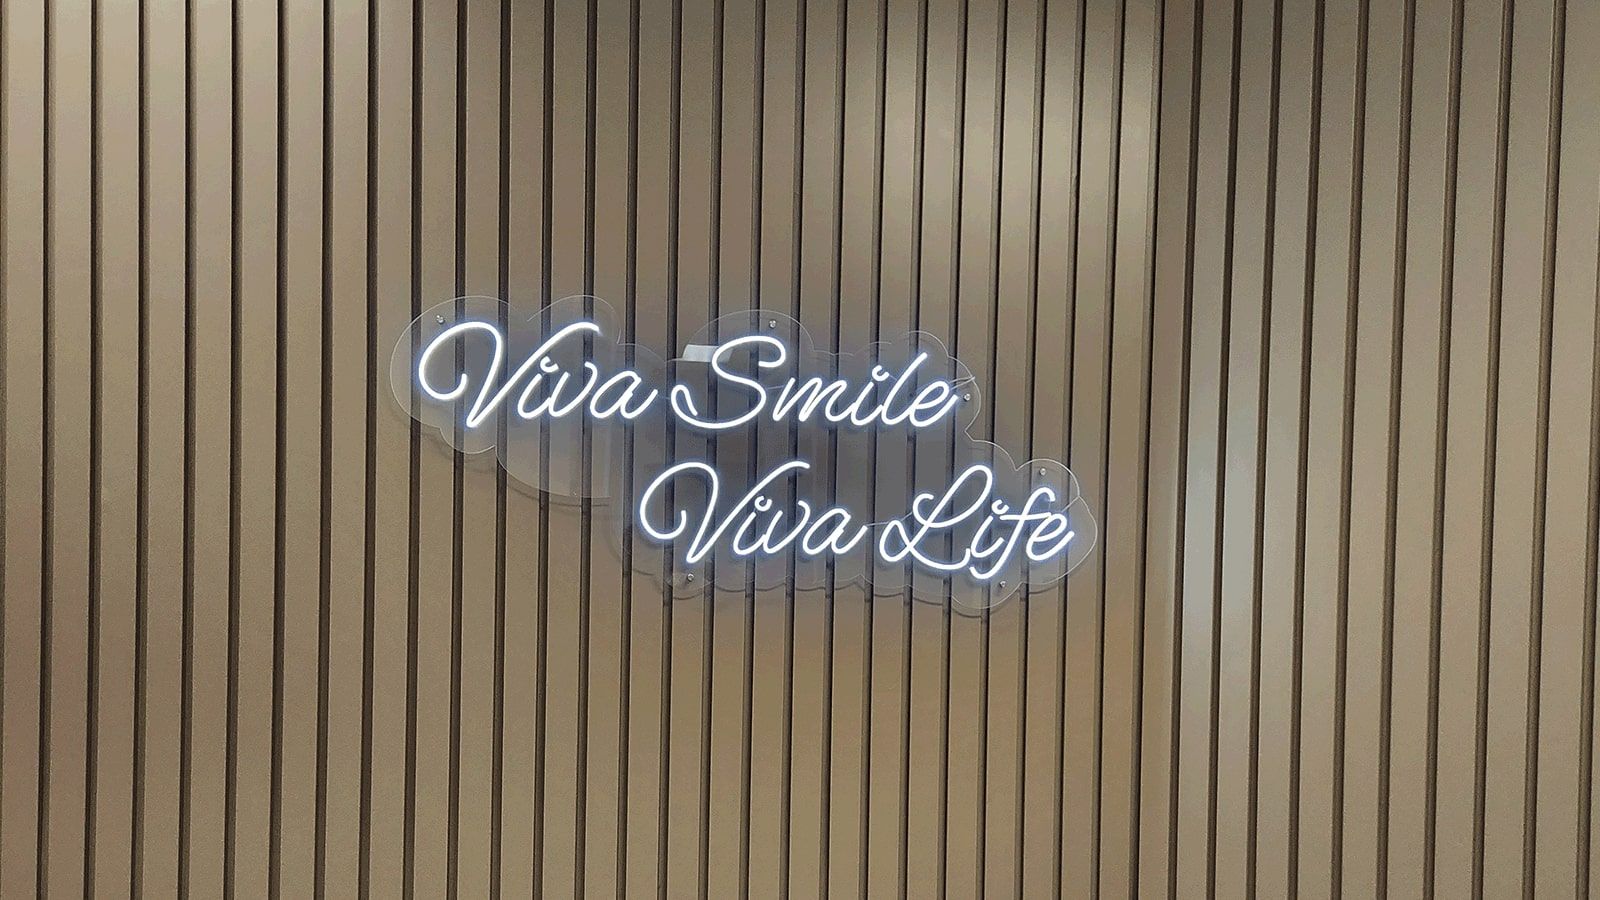 Viva Smile custom signage attached to the wall